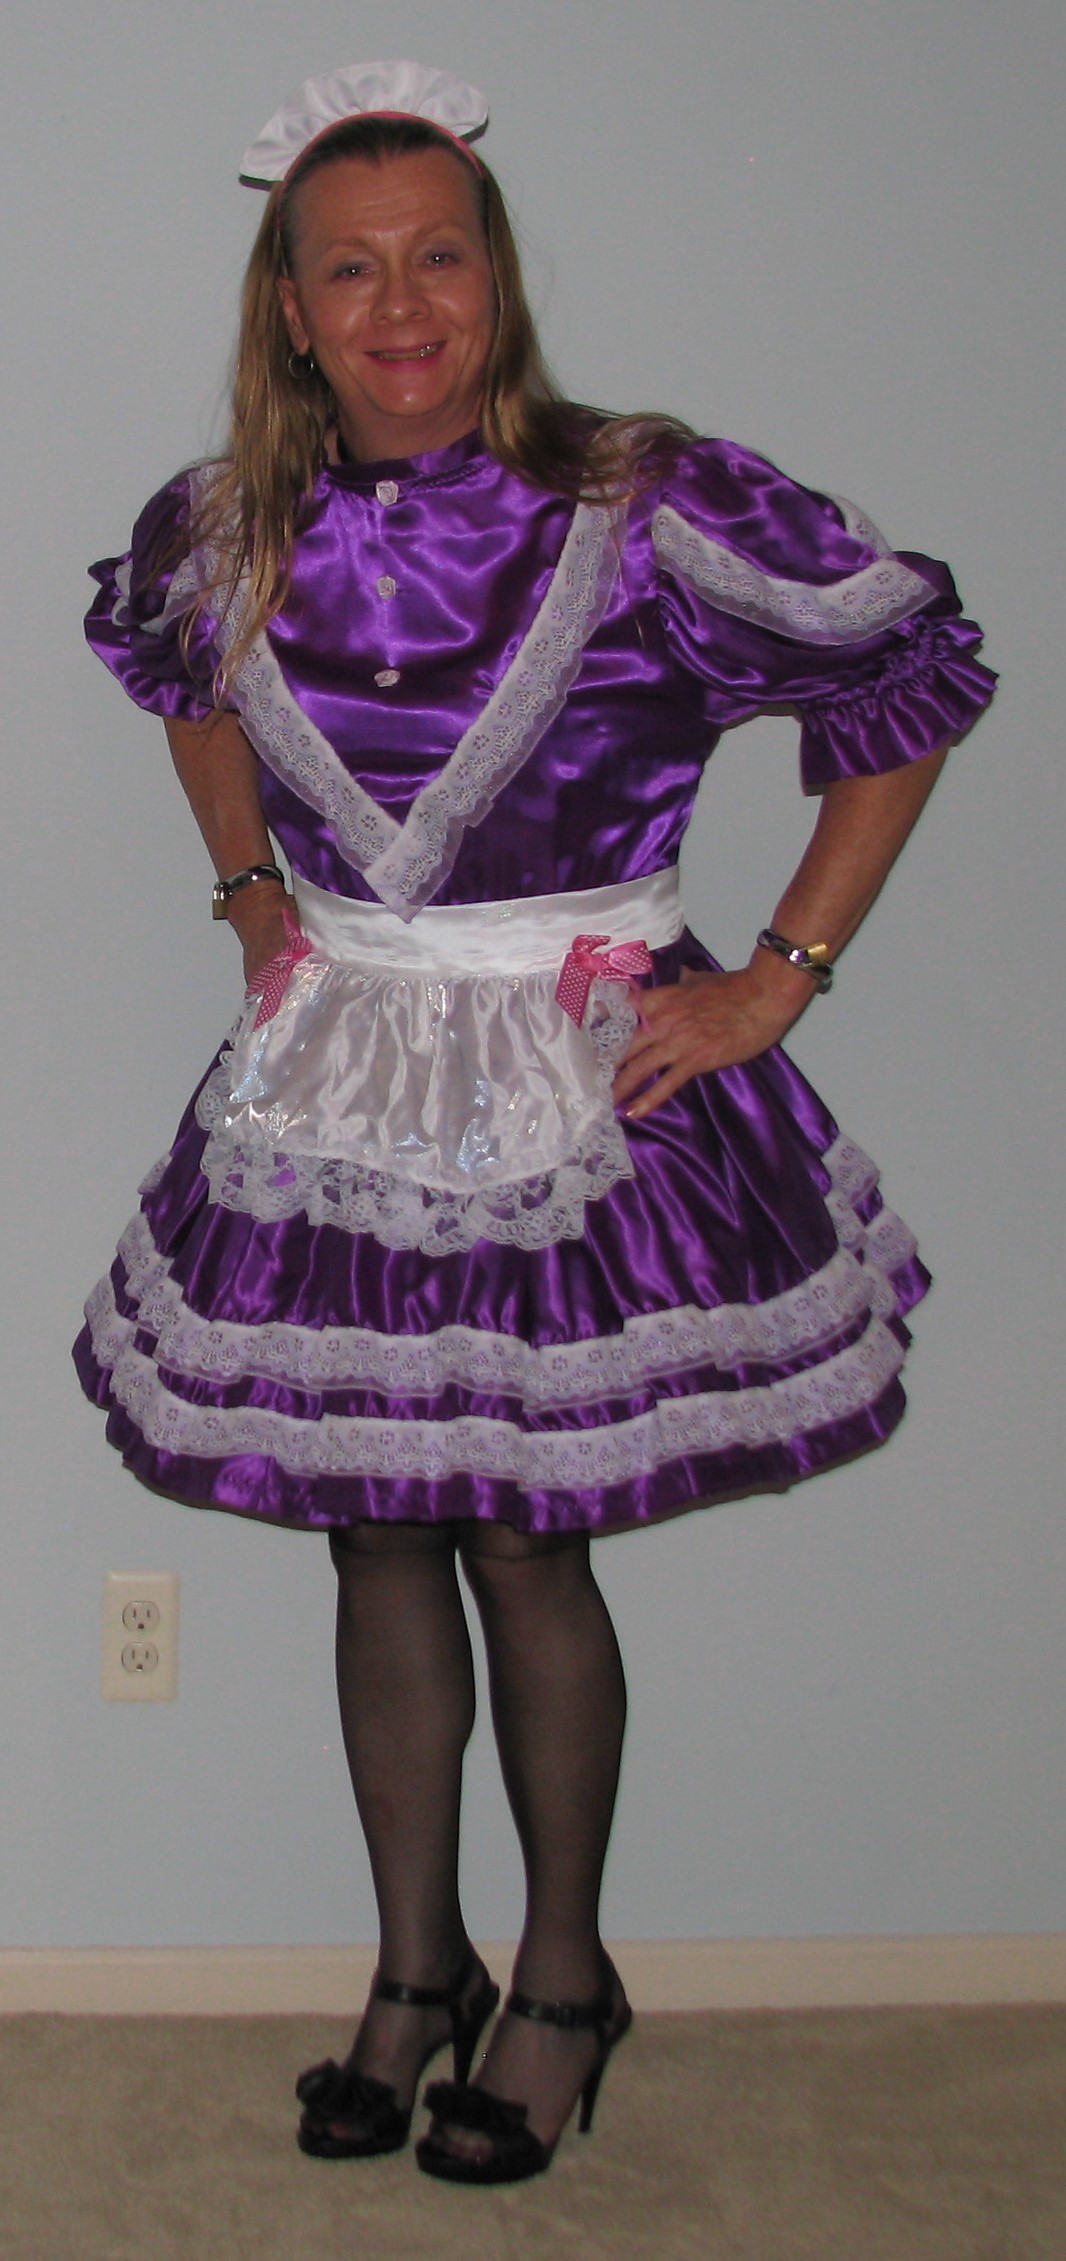 Chrisissy in her purple Sissy Maid Uniform ready to serve